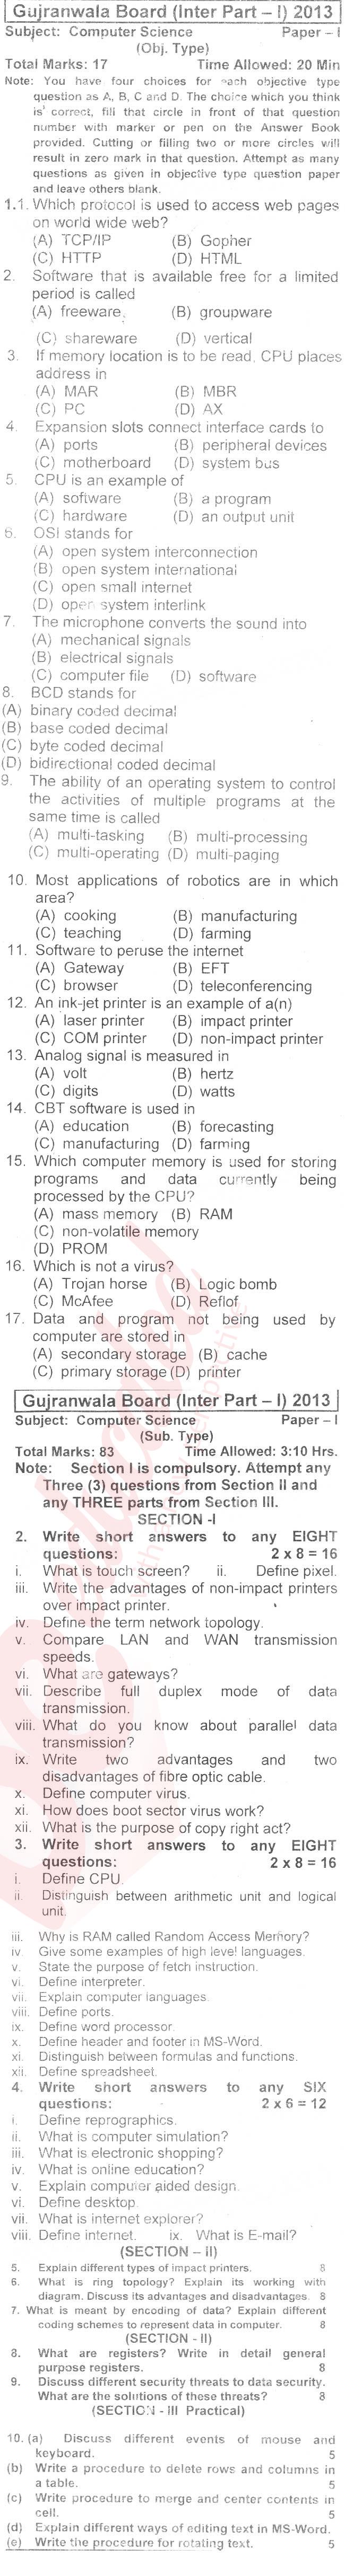 Computer Science ICS Part 1 Past Paper Group 1 BISE Gujranwala 2013